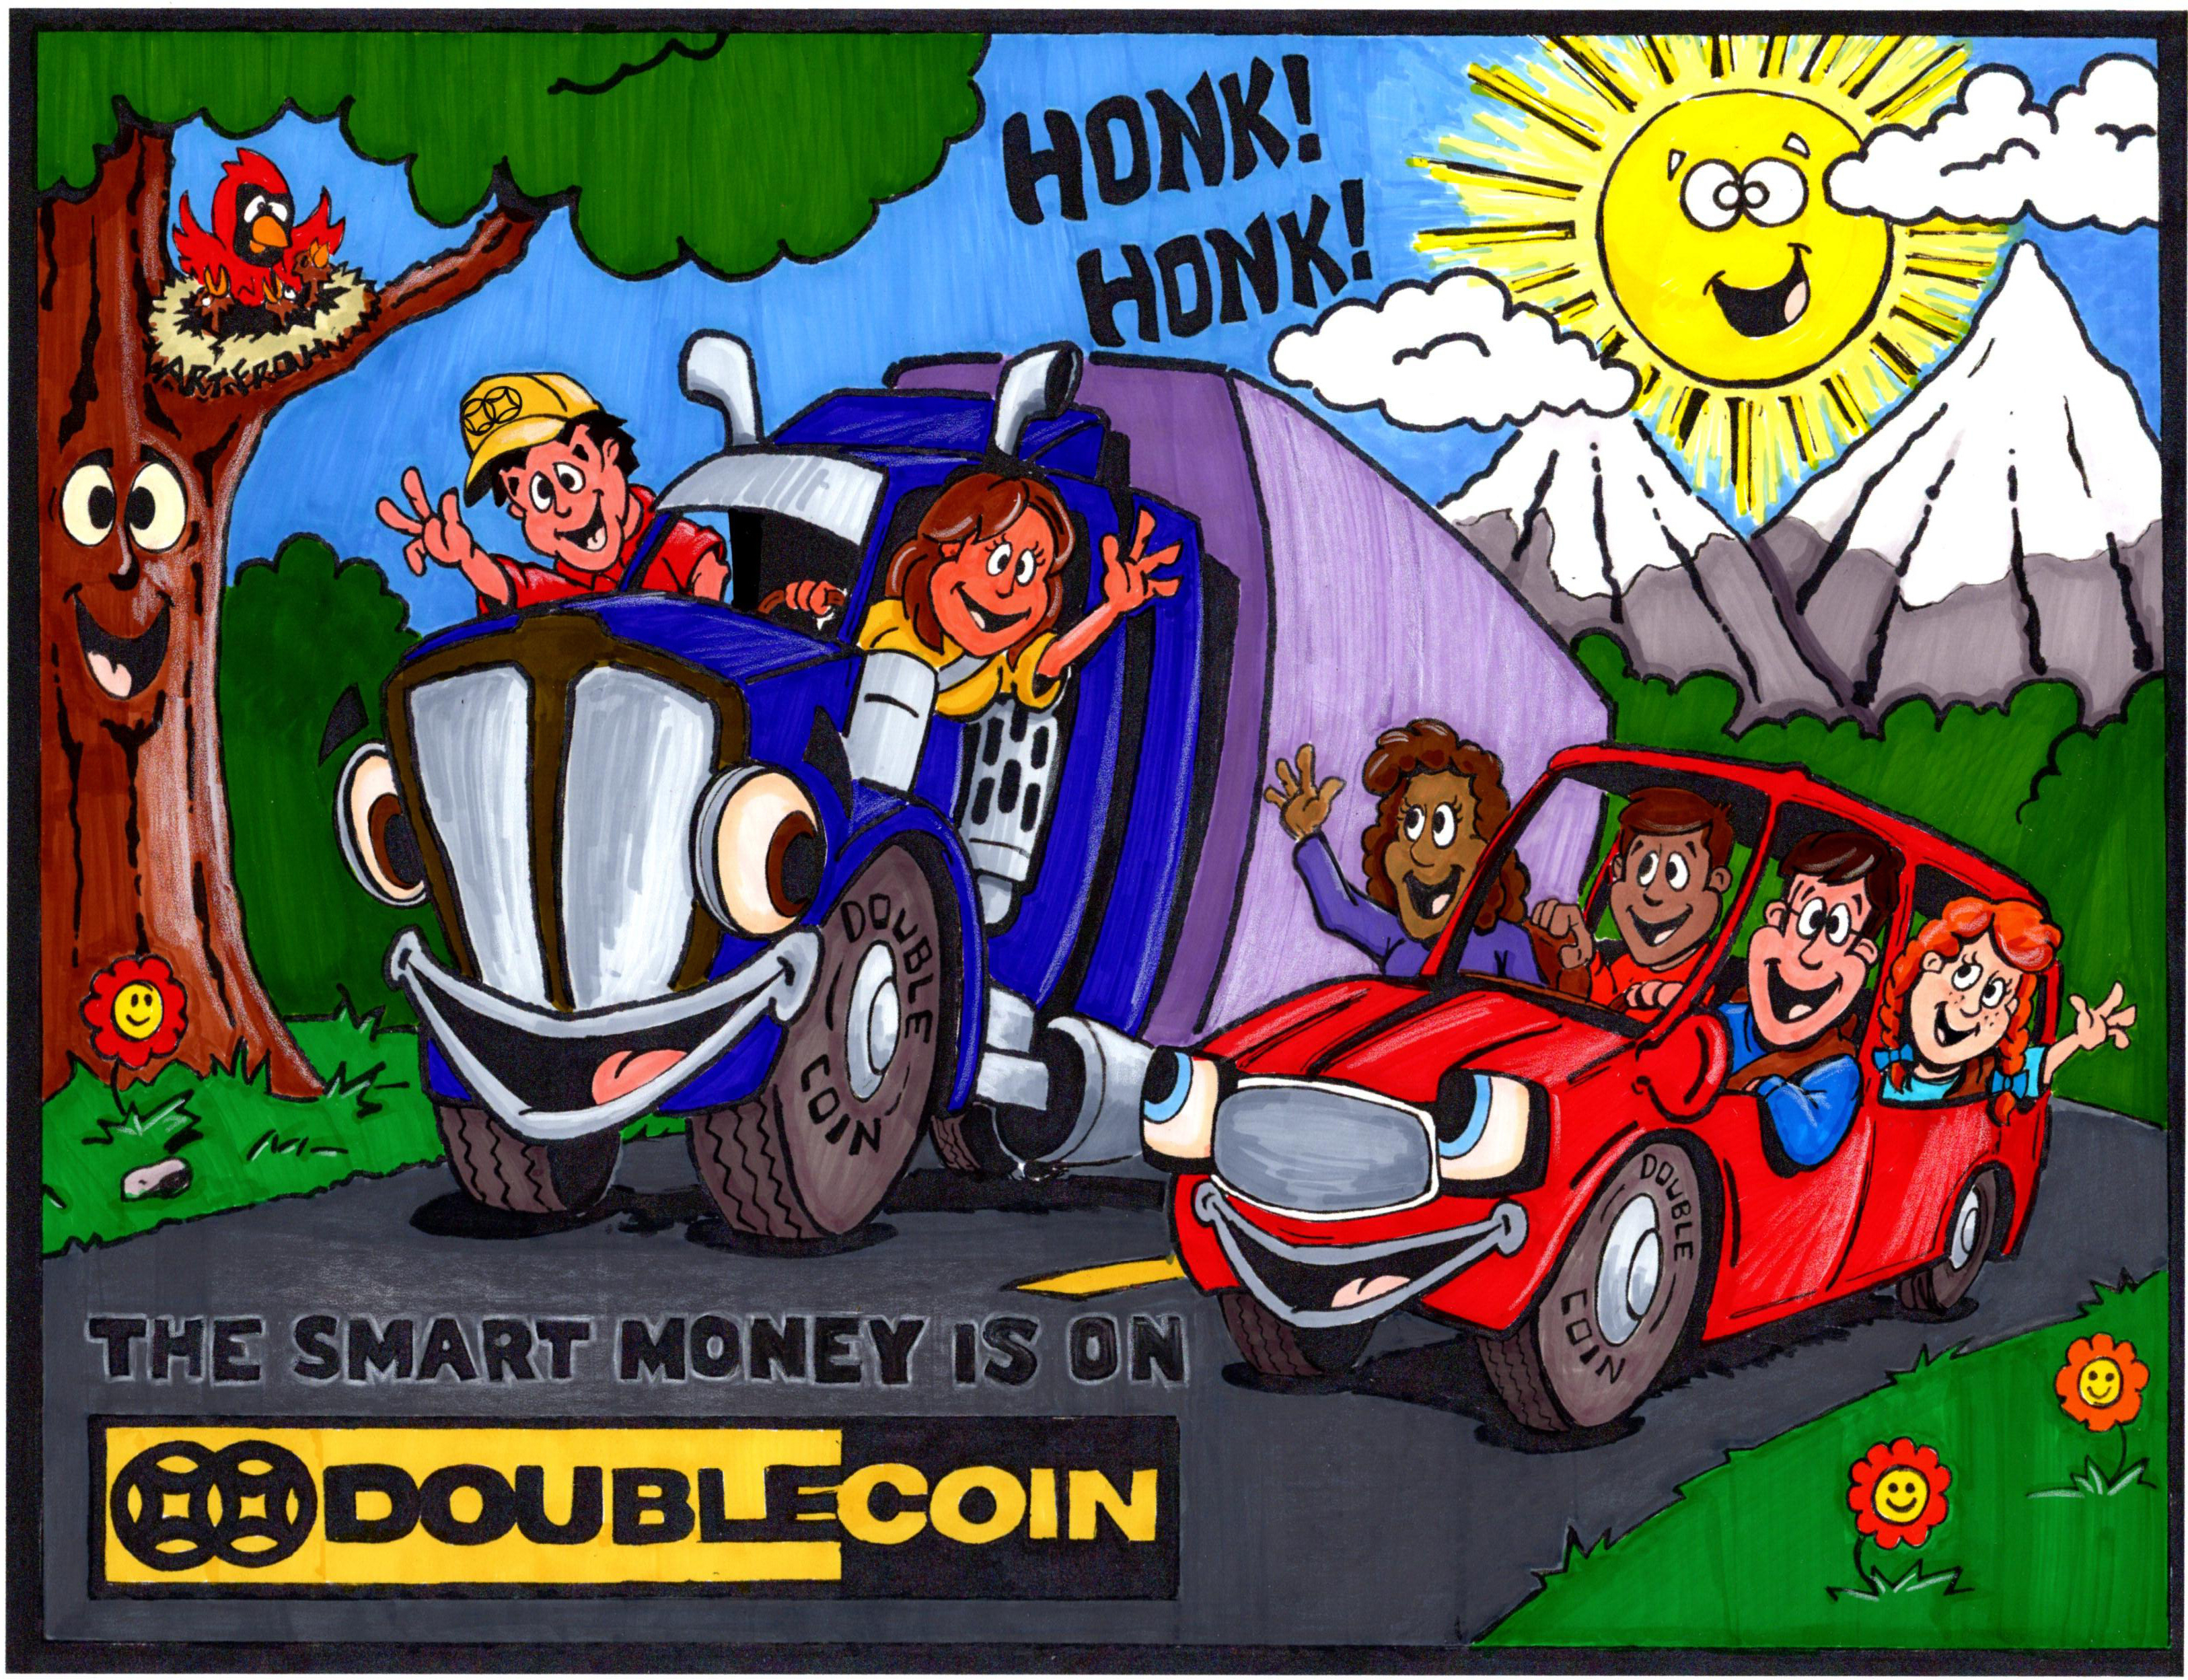 Double Coin Coloring Contest - young kid version